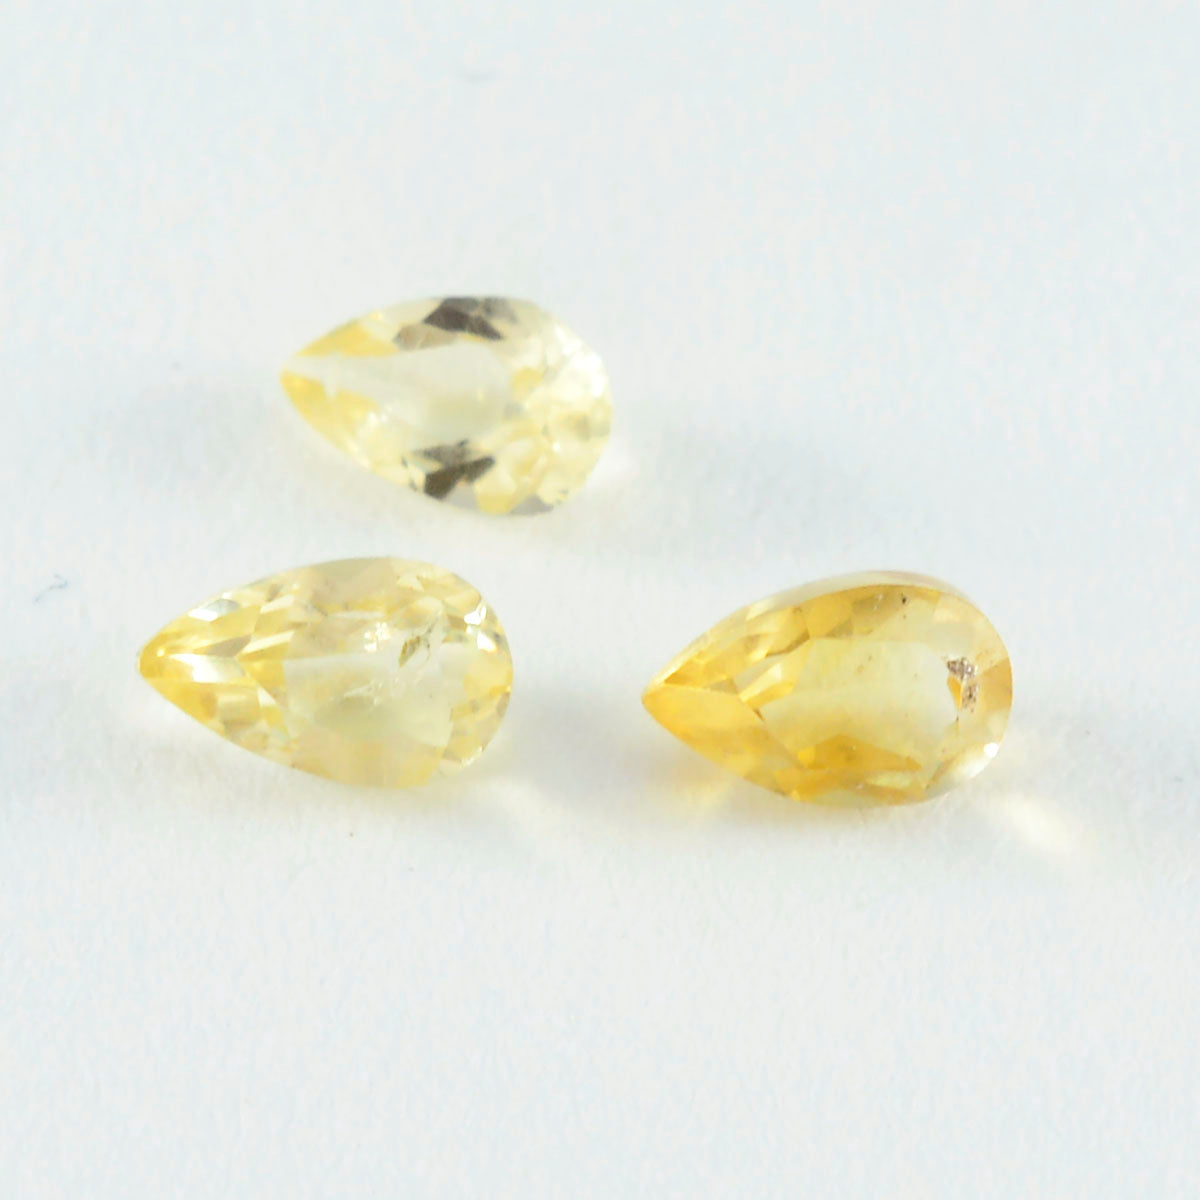 Riyogems 1PC Real Yellow Citrine Faceted 8x12 mm Pear Shape startling Quality Stone